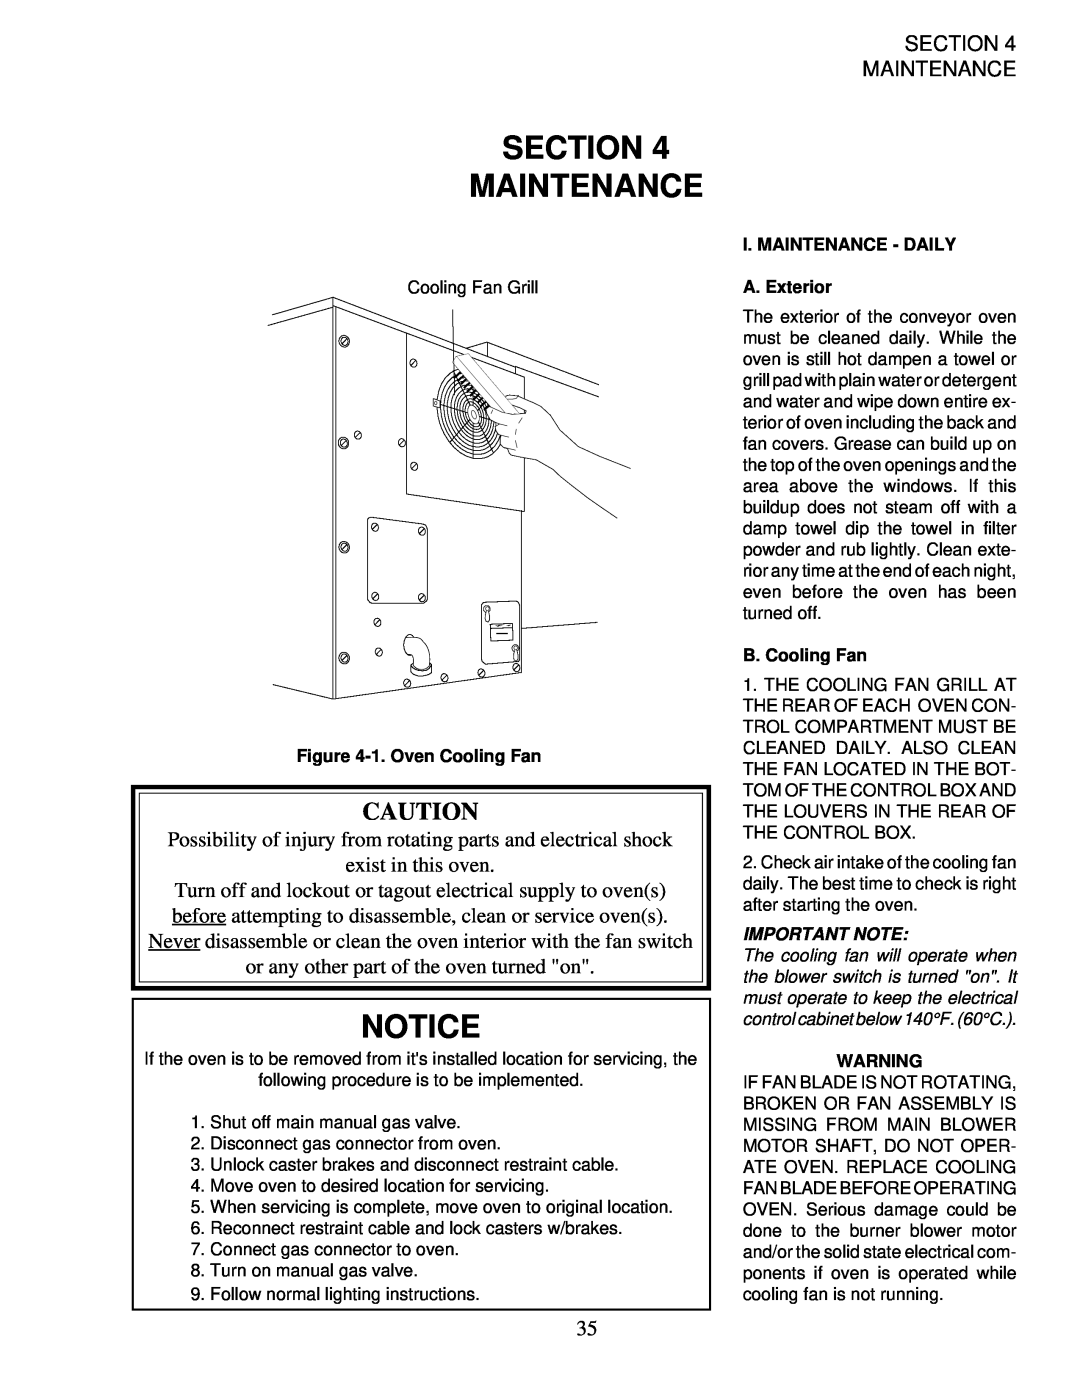 Middleby Marshall PS200-R68 Section Maintenance, Notice, 1.Oven Cooling Fan, I. MAINTENANCE - DAILY A. Exterior 